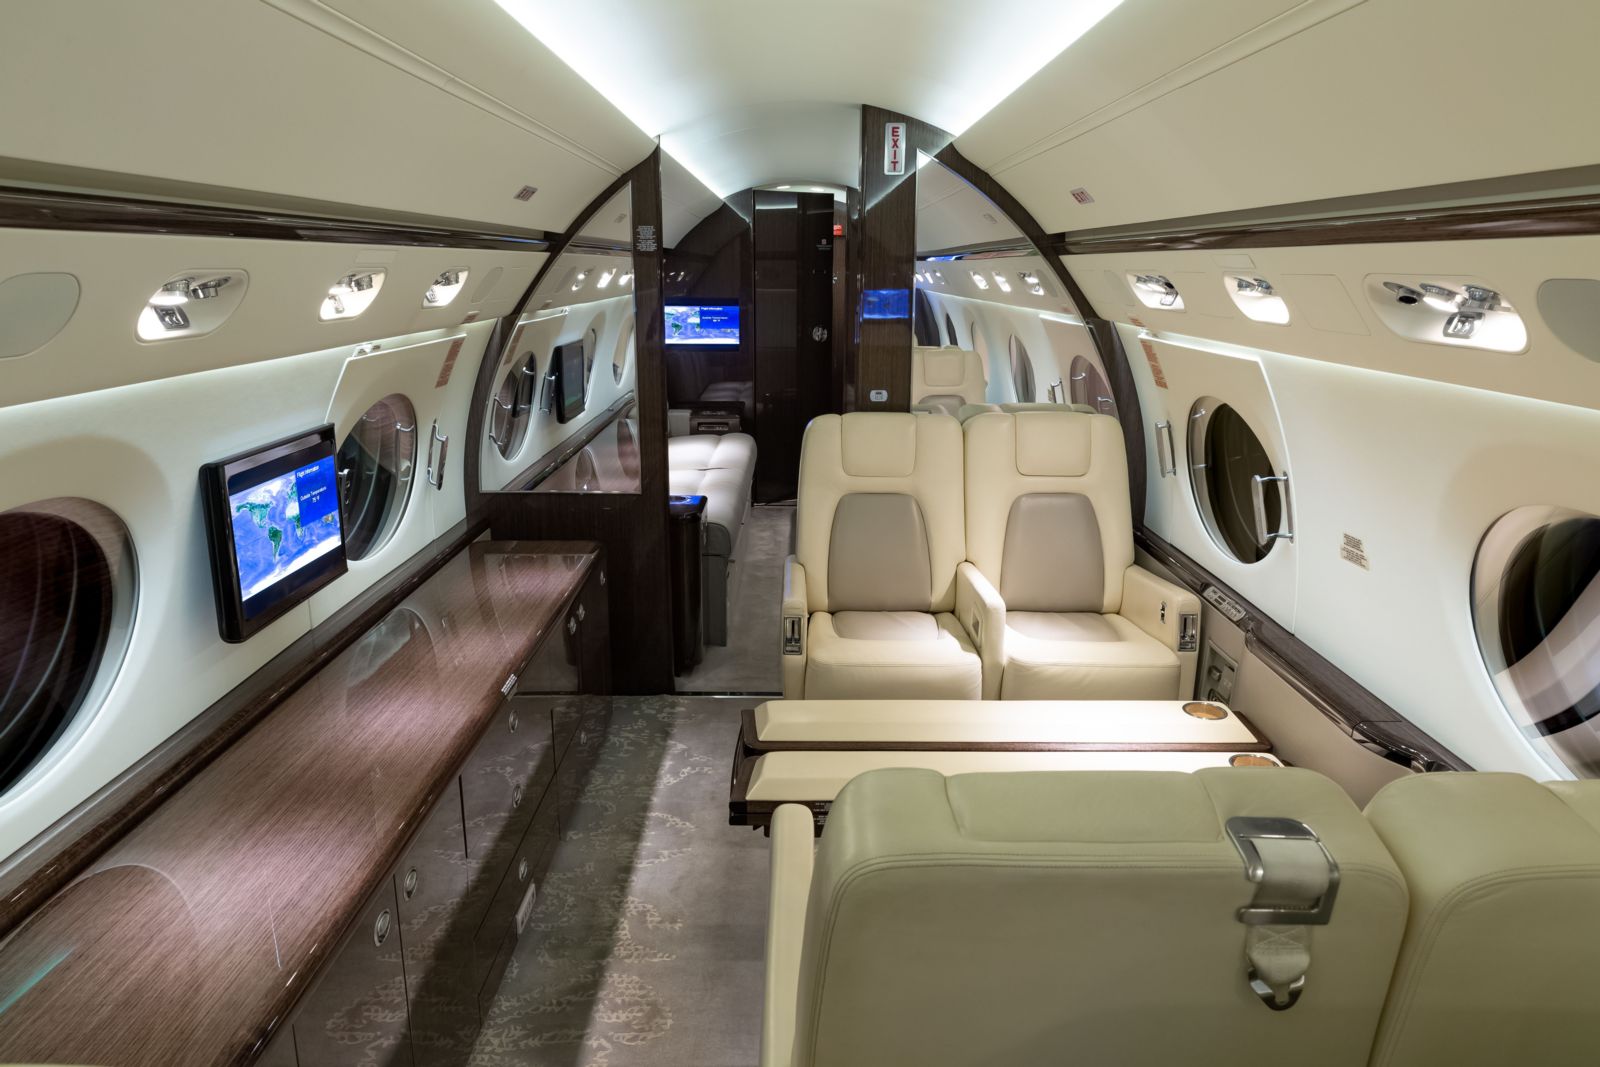 Gulfstream G550  S/N 5354 for sale | gallery image: /userfiles/files/c%20group%20-%205354.jpeg